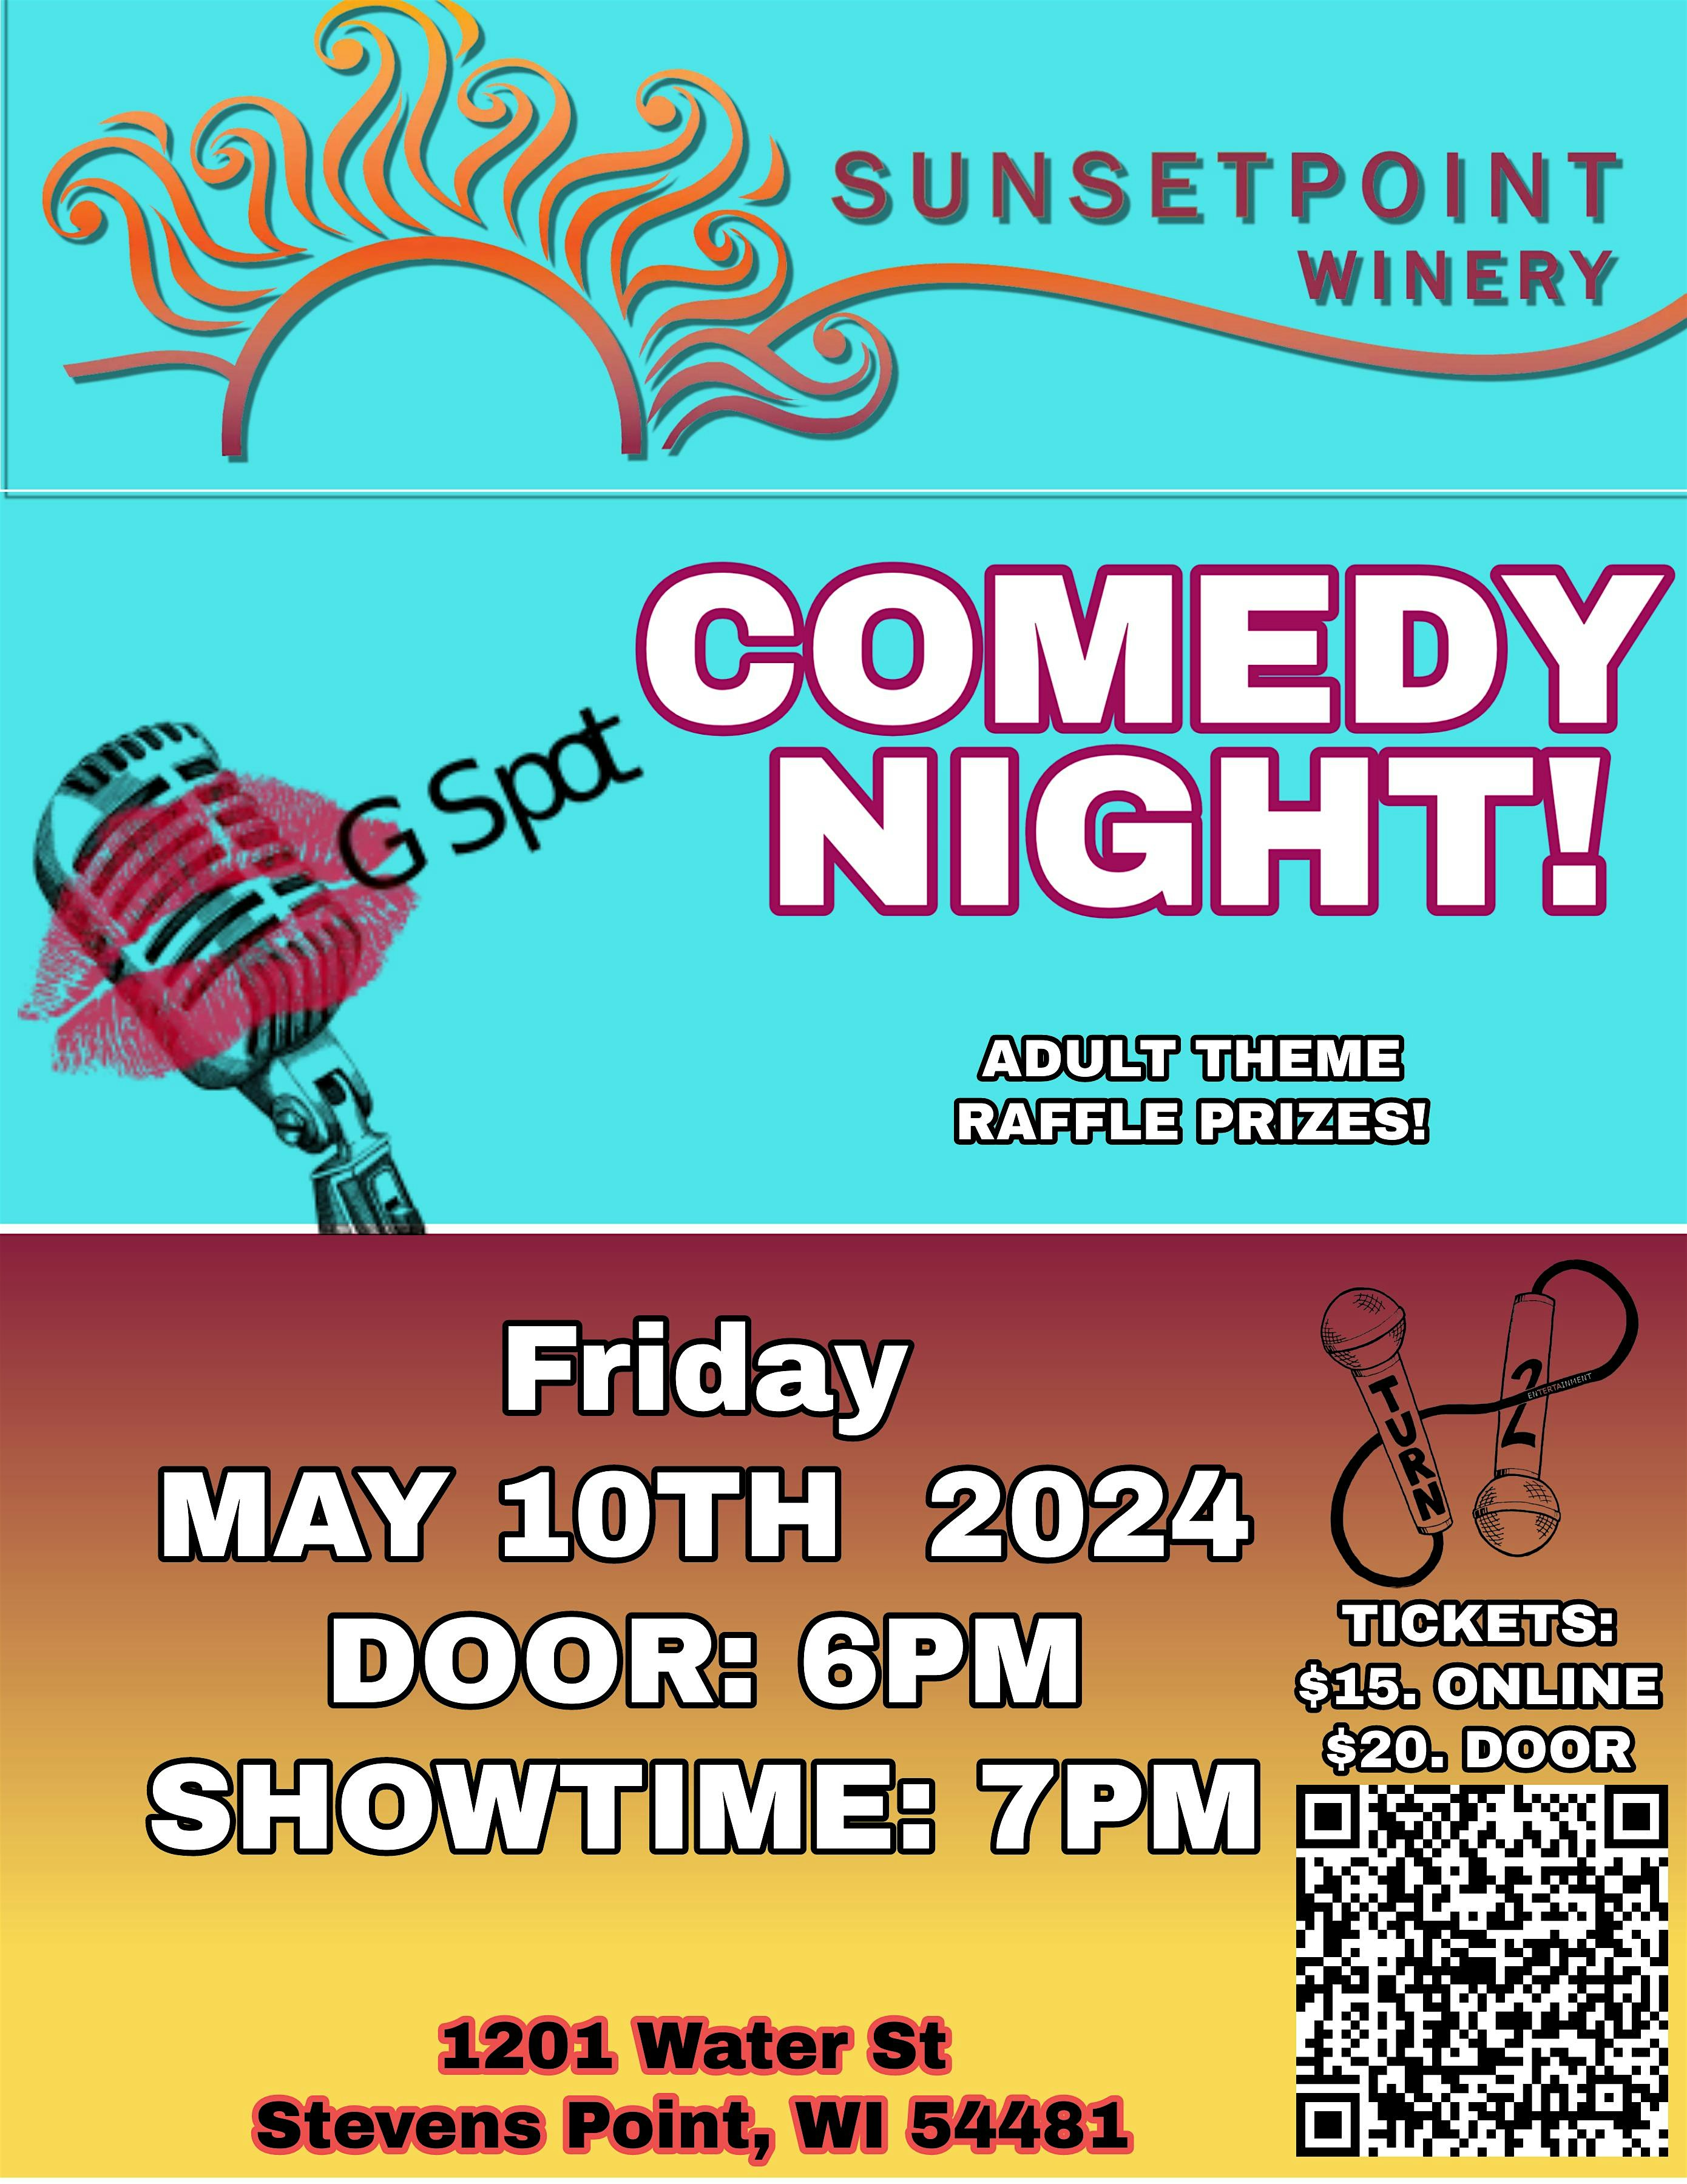 Sunset Point Winery Comedy Night